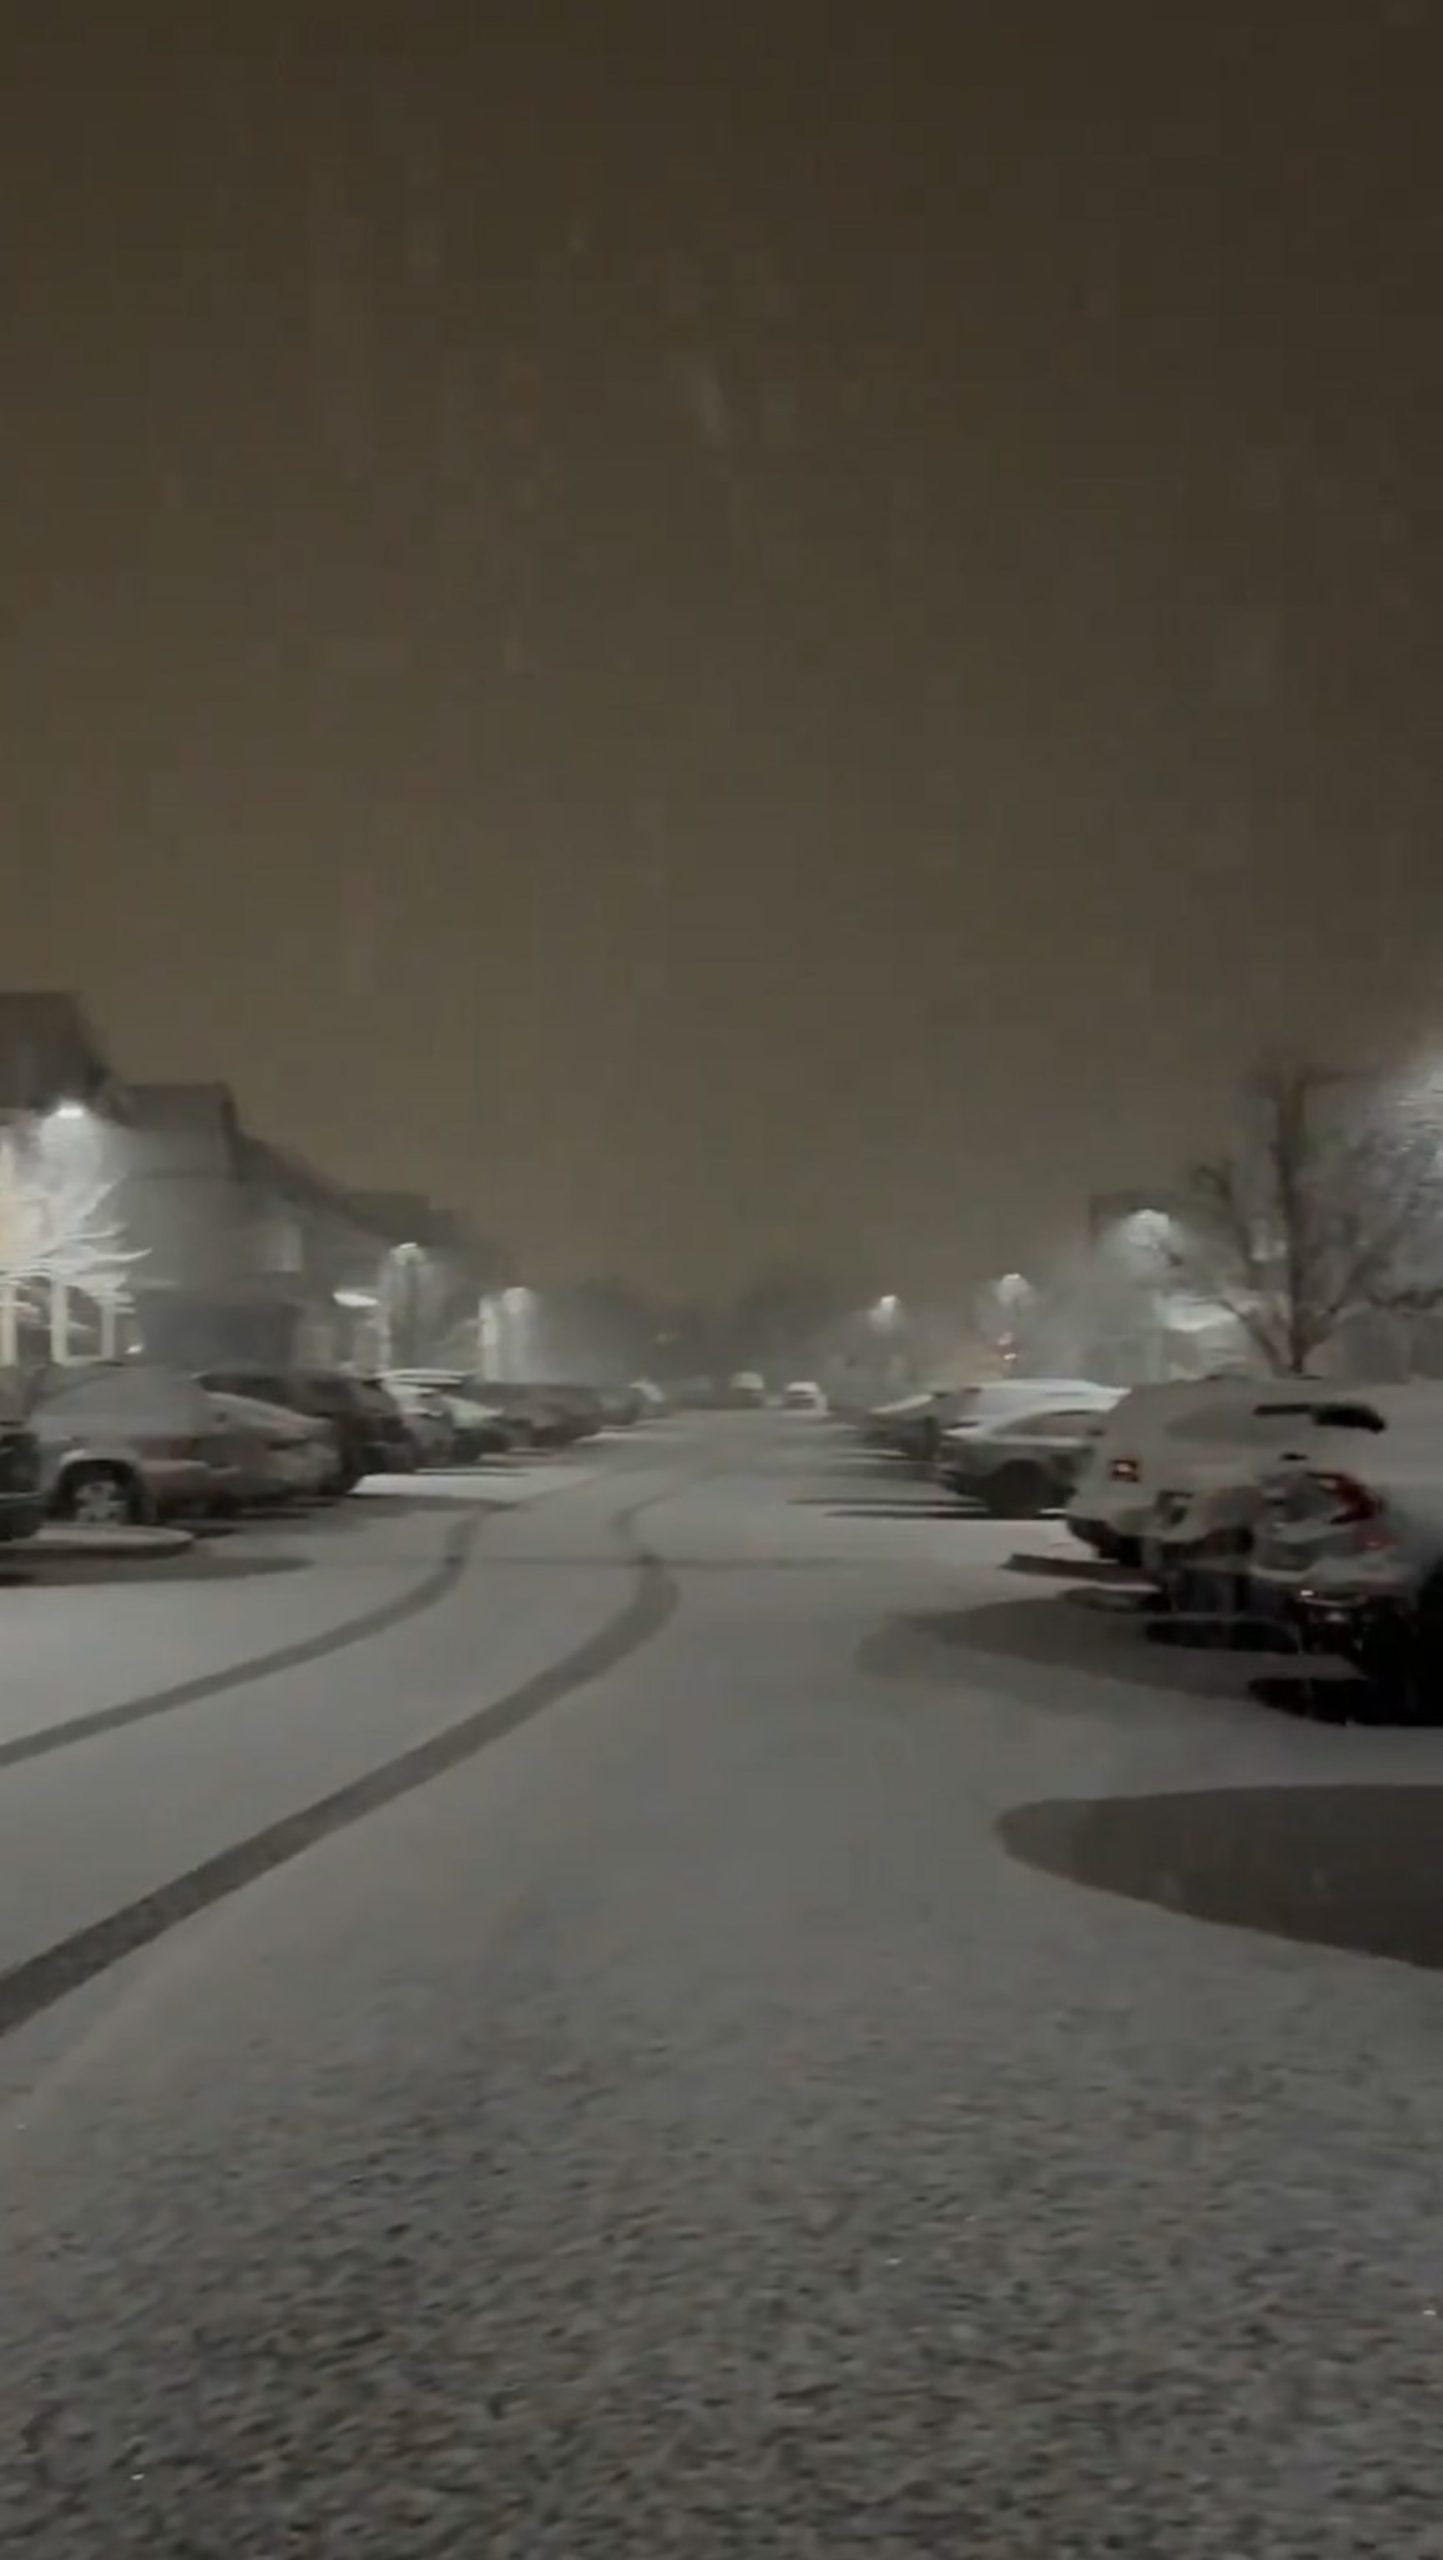 Northeastern regions hit by winter storm, Pennsylvania receives over a foot of snow